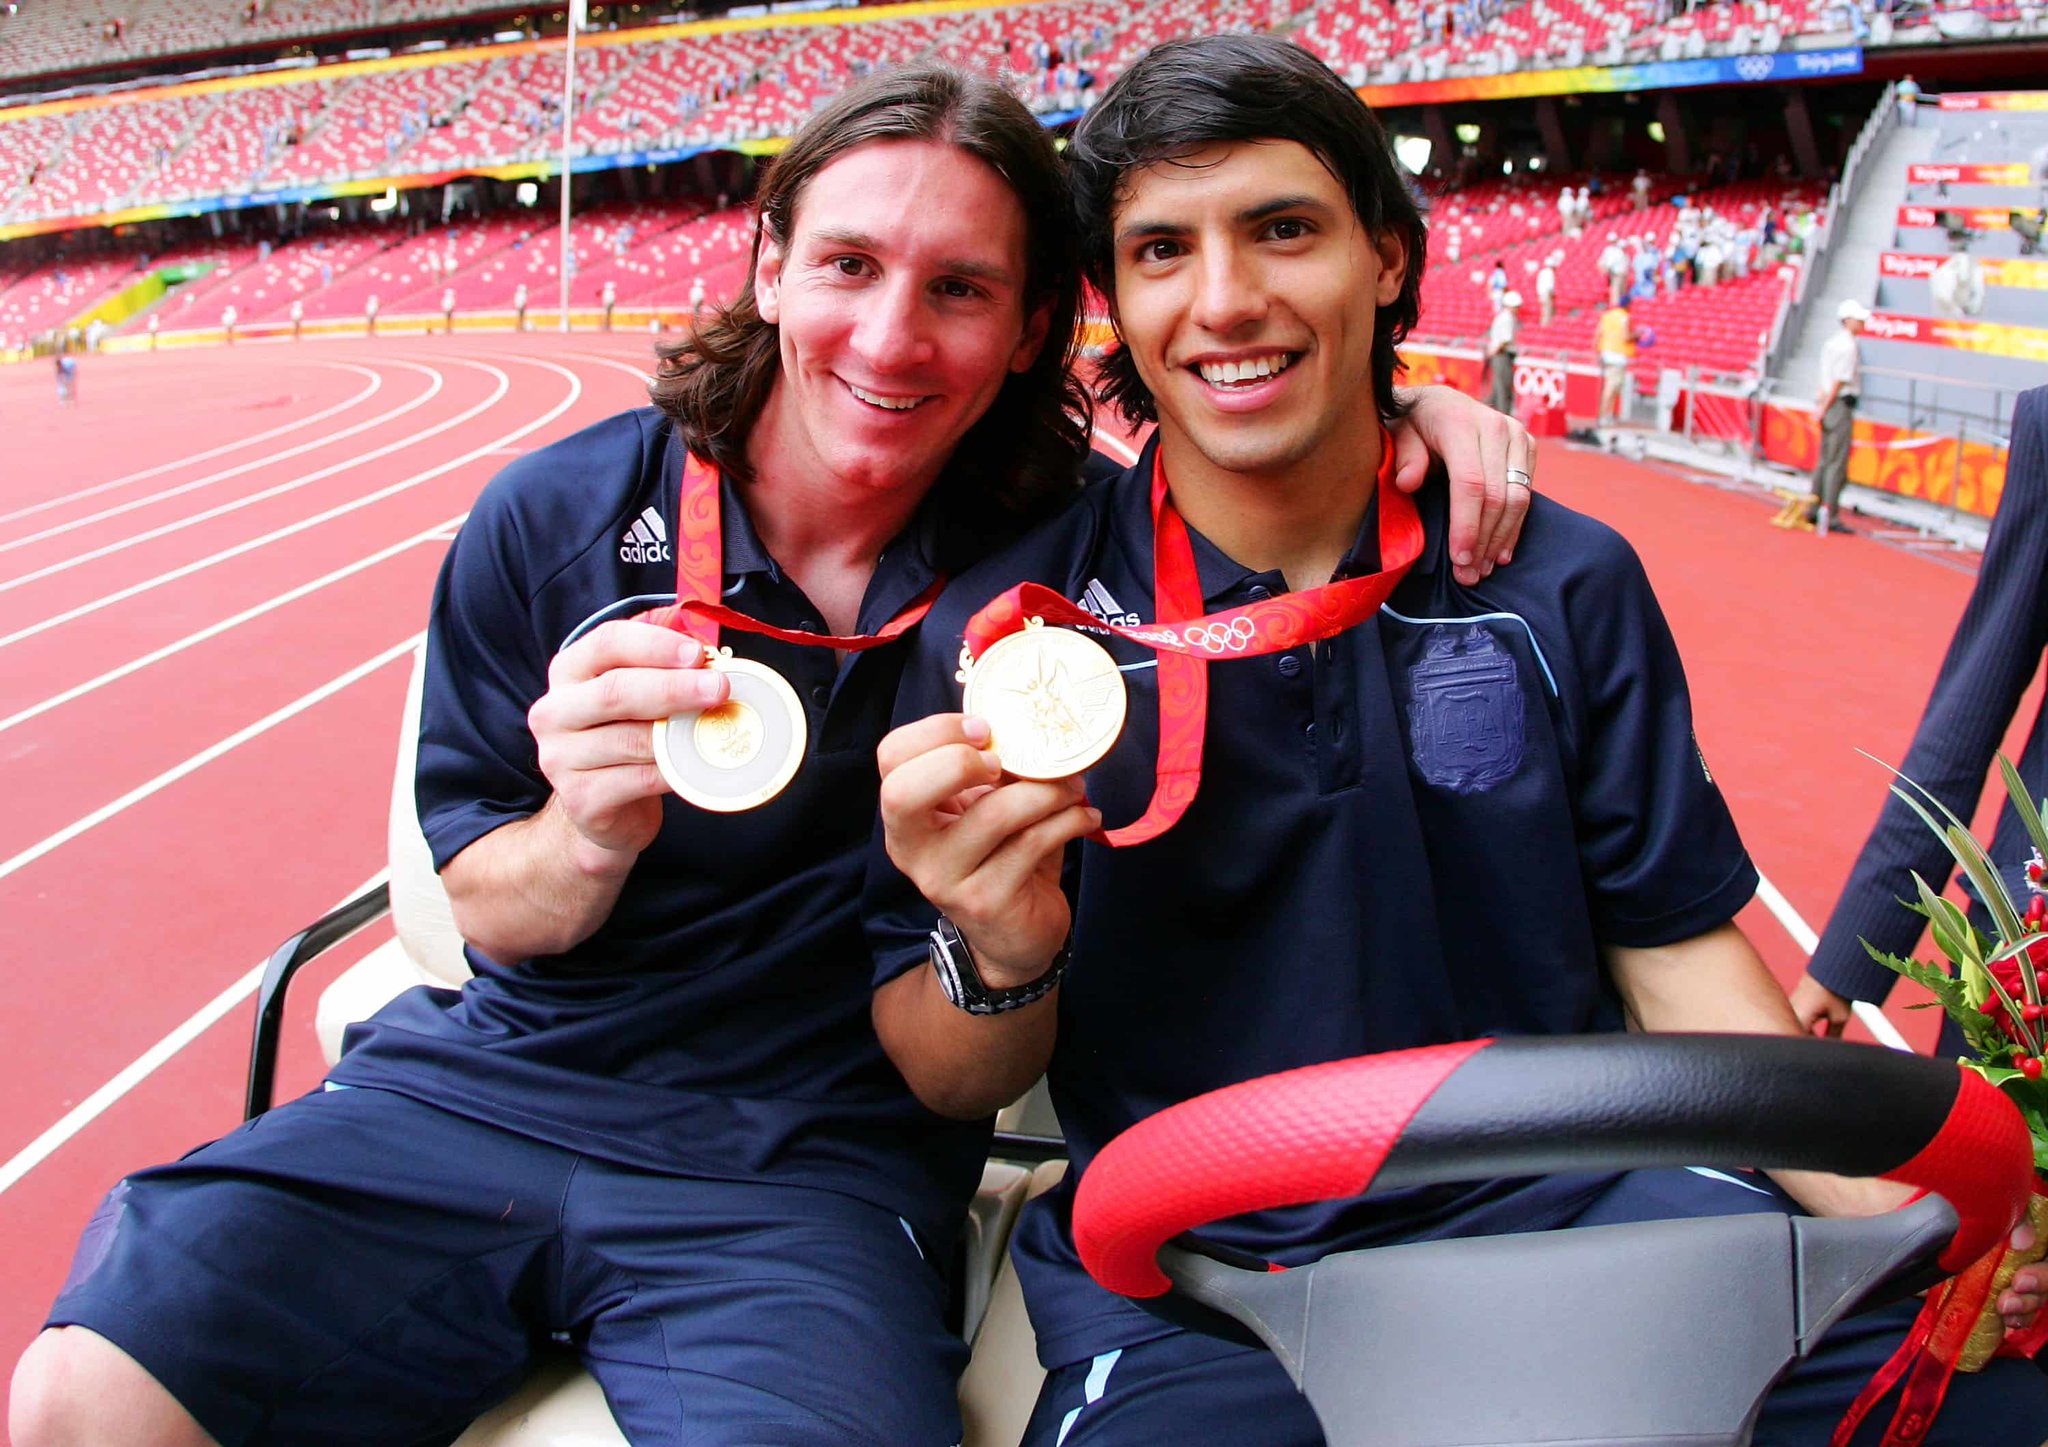 
Lionel Messi with Sergio Agüero at the 2008 Beijing Olympics Games.